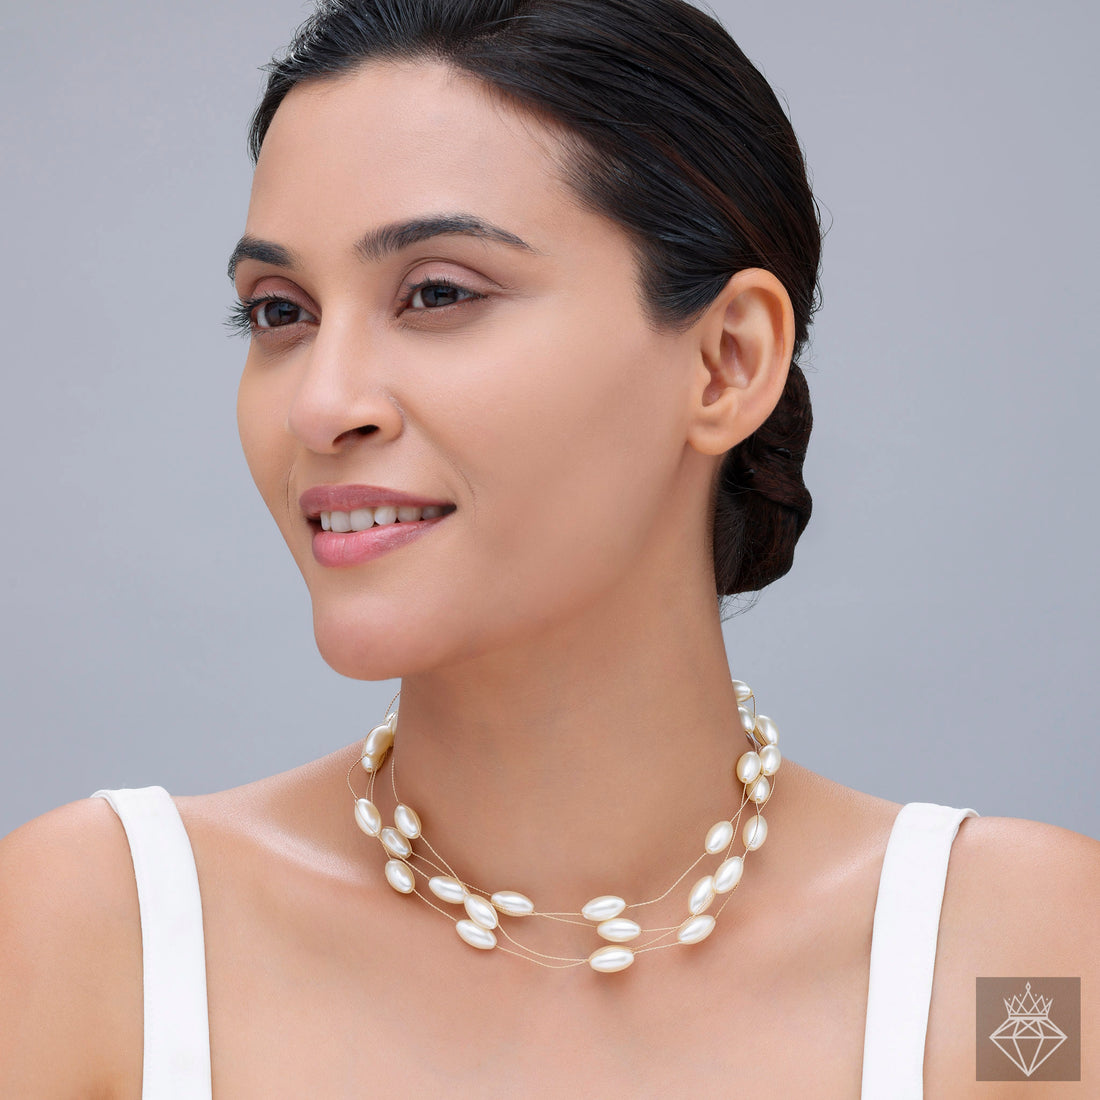 PRAO's Lustrous Harmony Oval Pearl Necklace